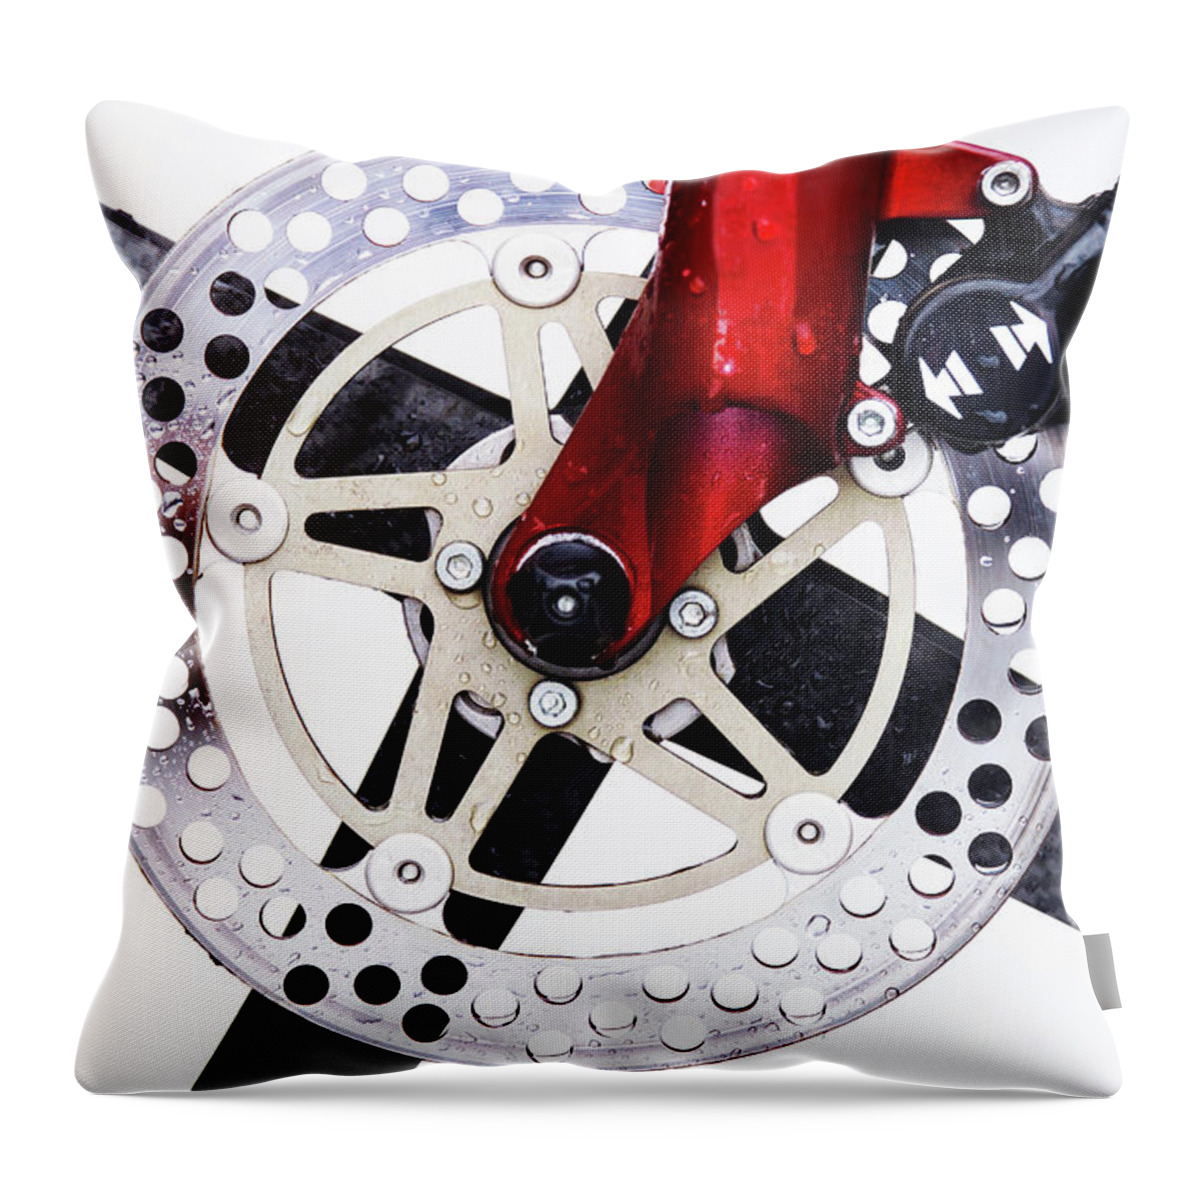 White Background Throw Pillow featuring the photograph Brake Disc by Westend61